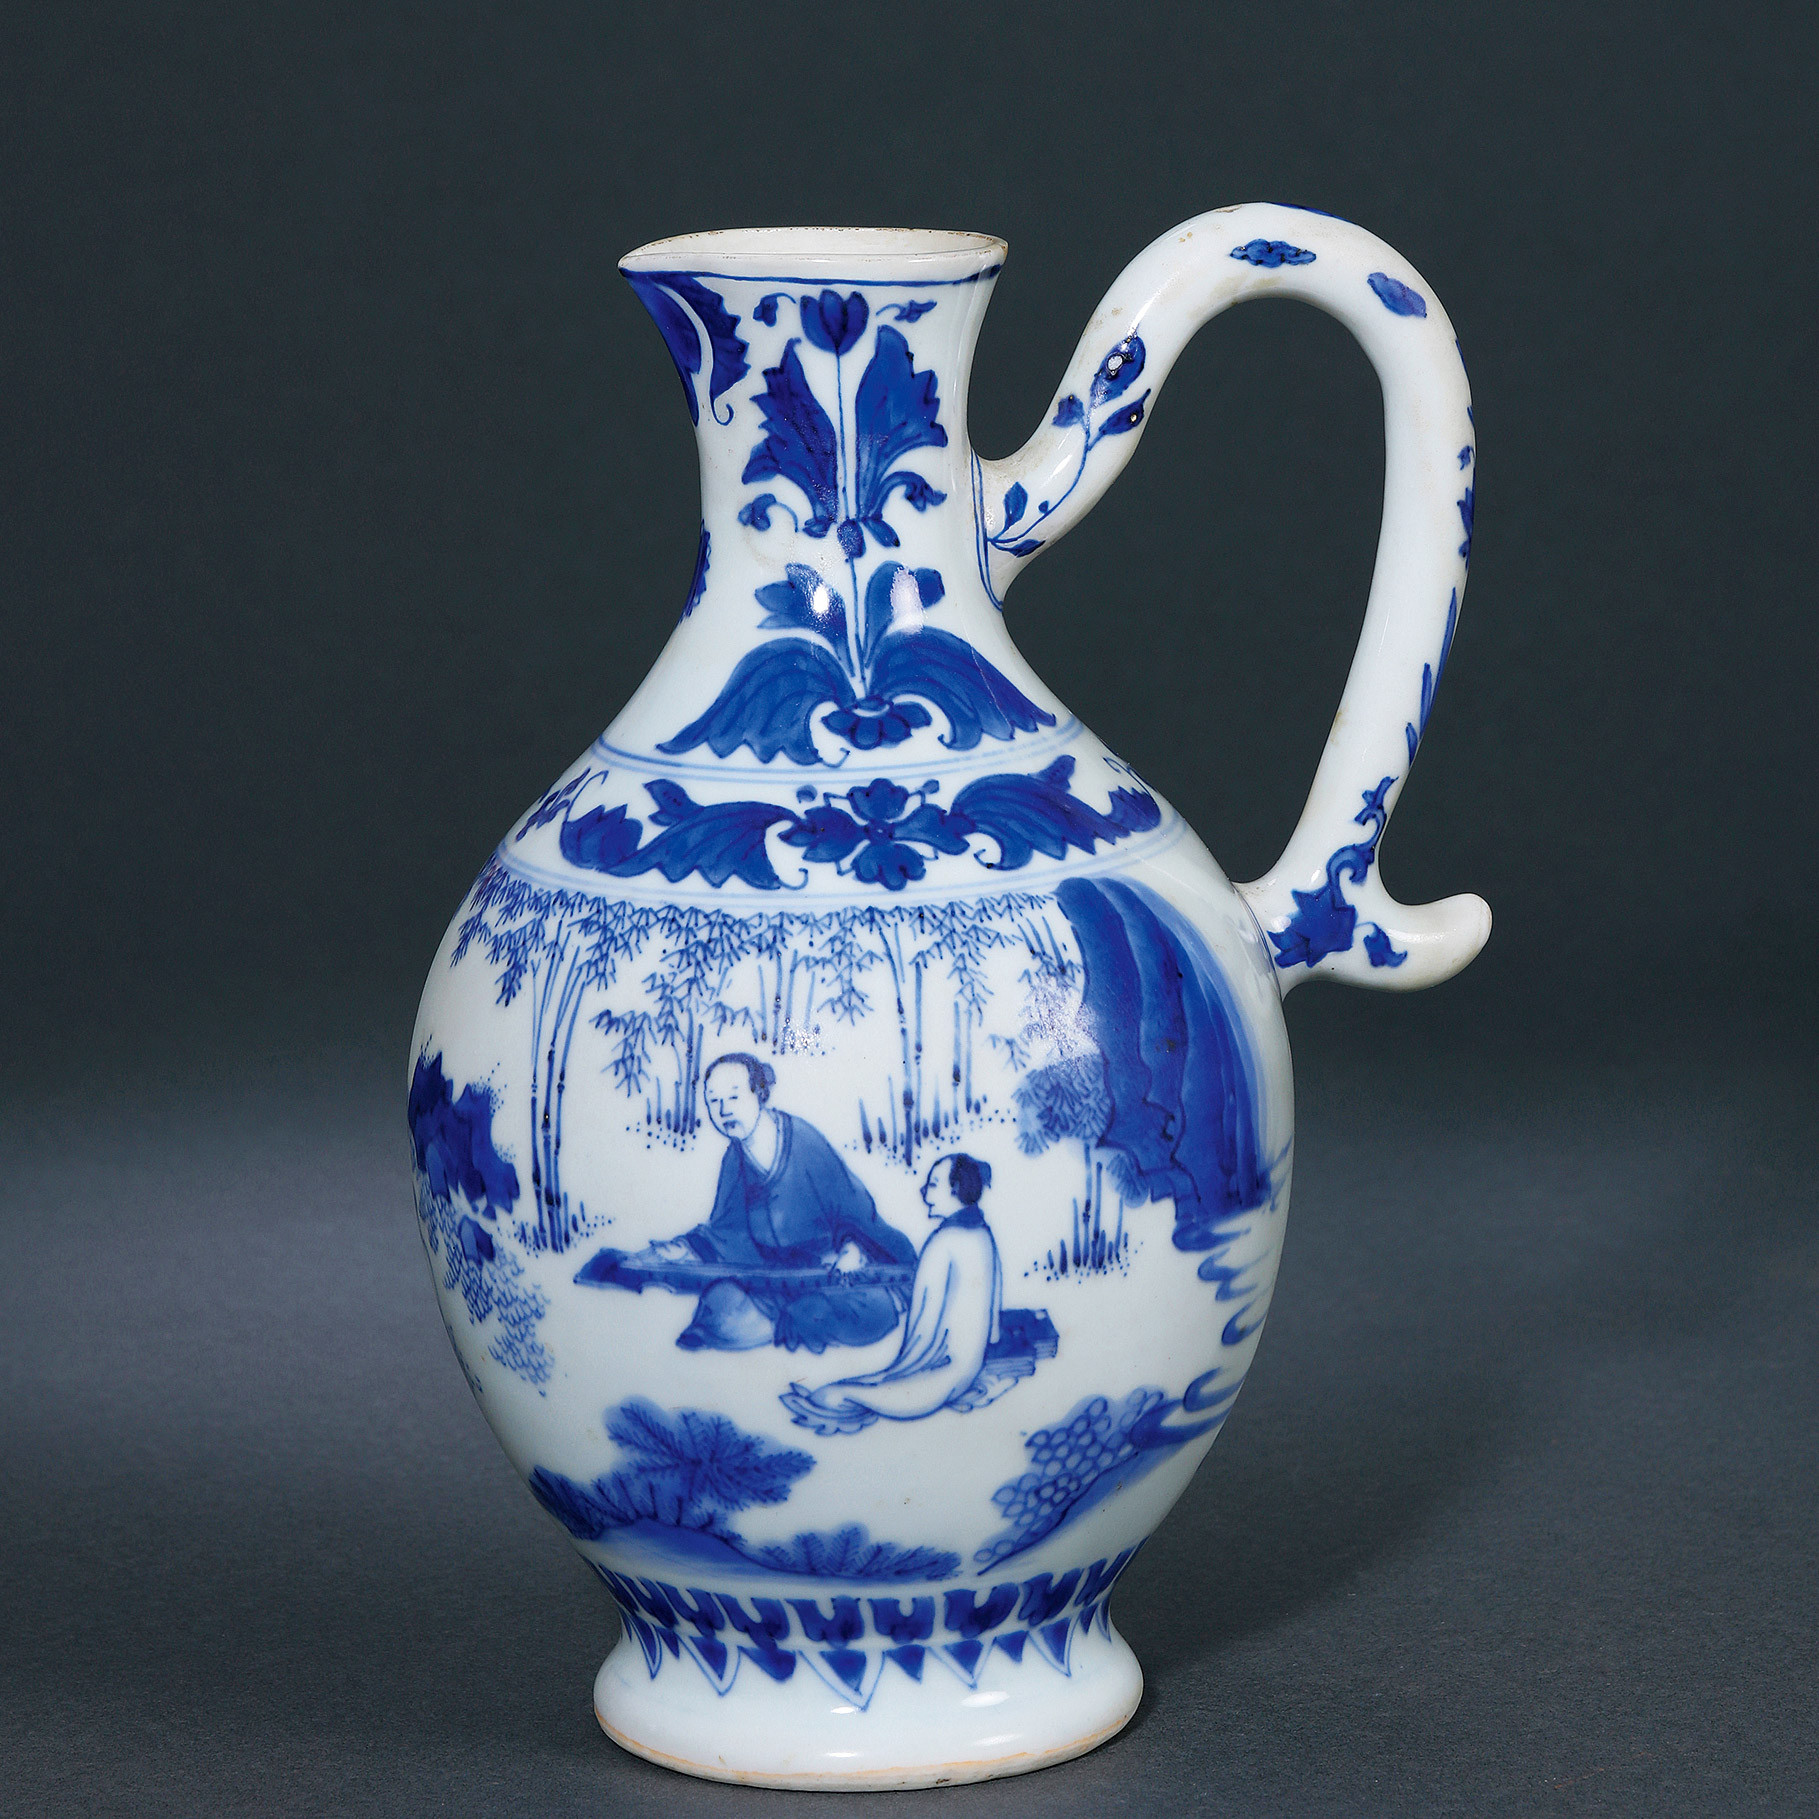 A BLUE AND WHITE EWER WITH HANDLE AT A SIDE